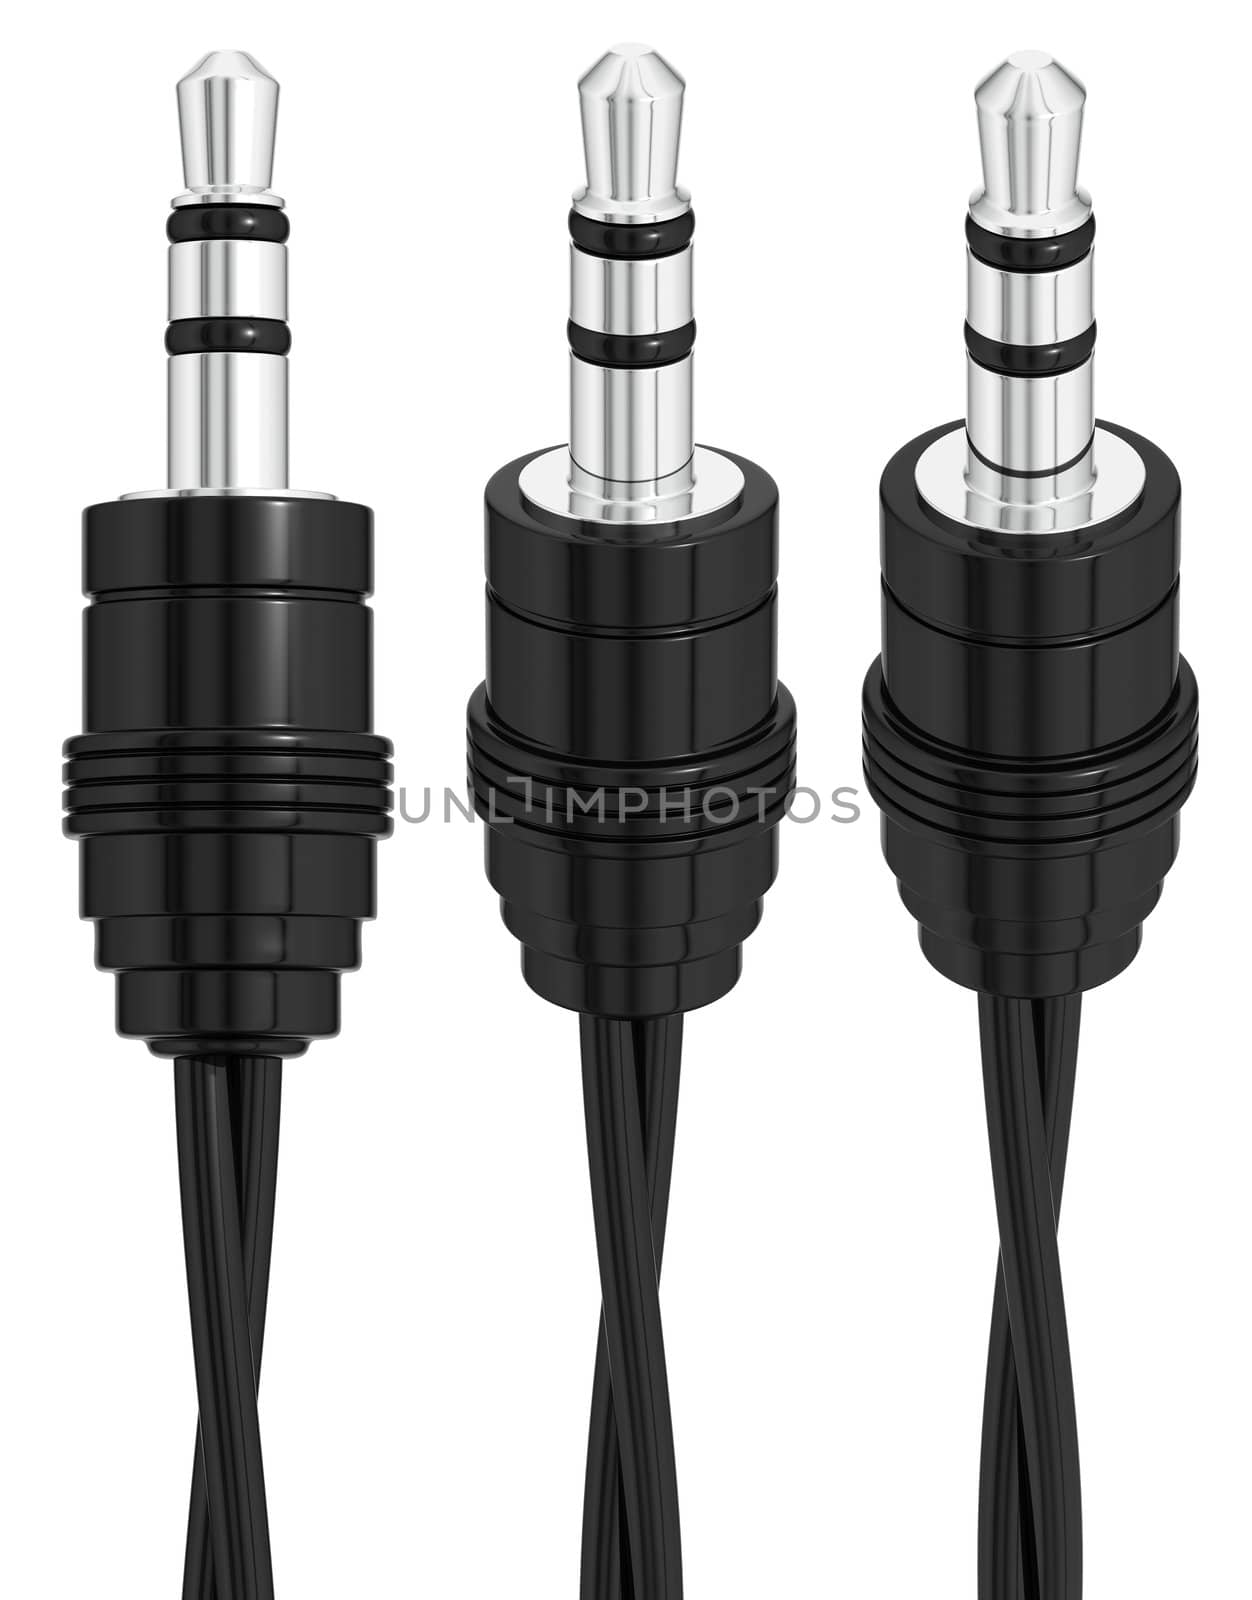 Input audio cable. by Sylverarts